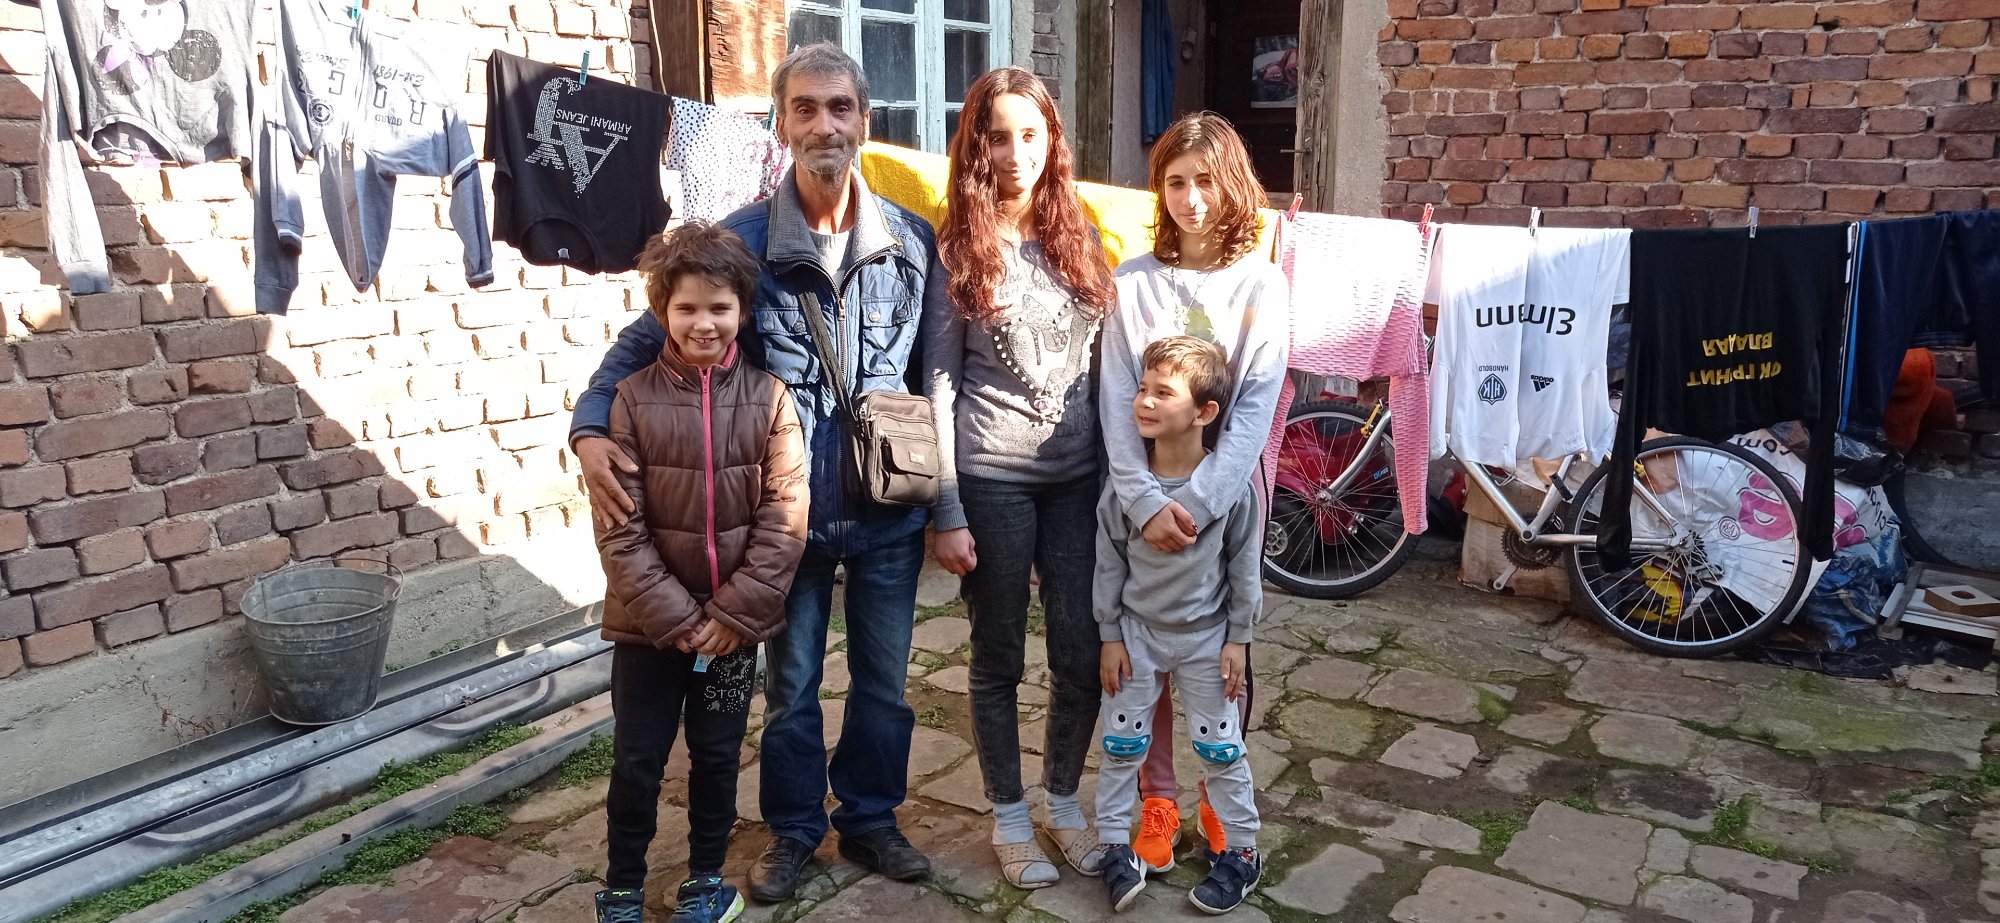 Krasimir was able to reunite with his children with the support he received through MWB's Street Mercy Program.